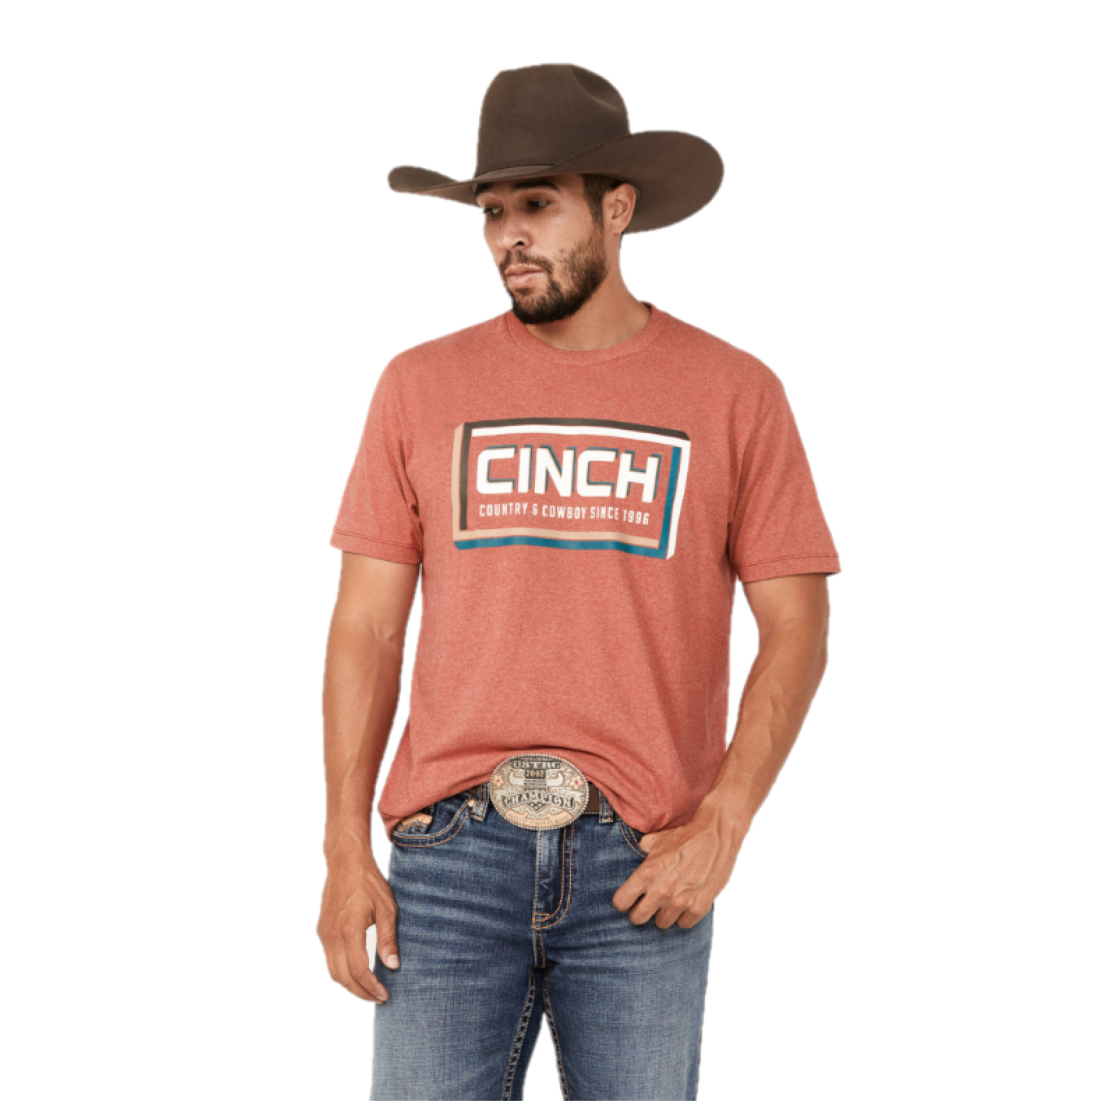 Cinch Men's Red "Country & Cowboy" Graphic T-Shirt MTT1690592